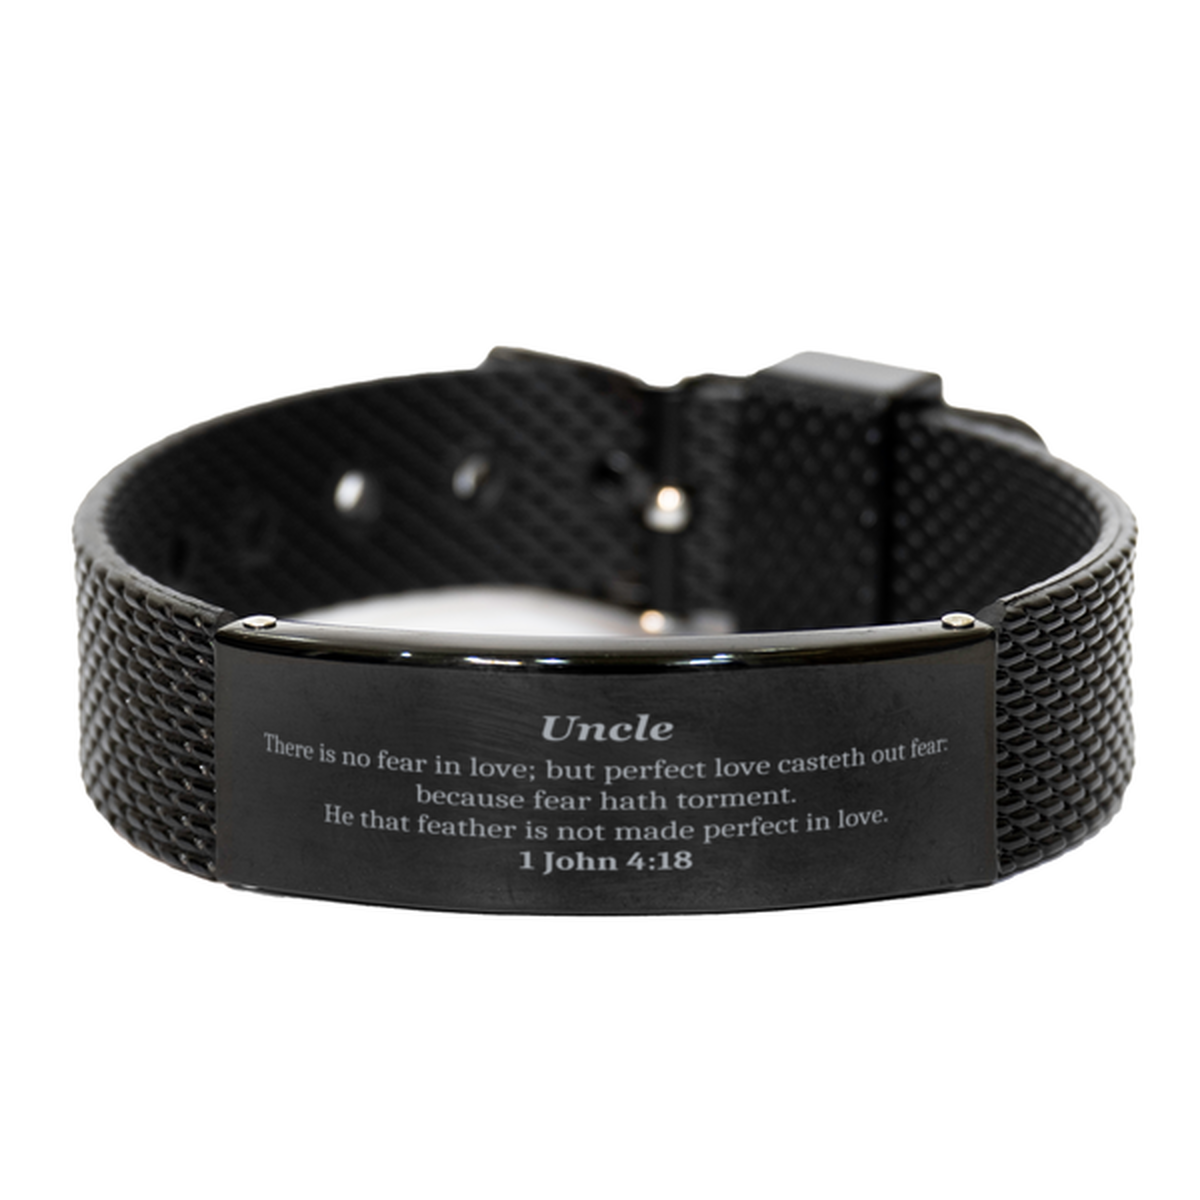 Uncle Black Shark Mesh Bracelet - Fear Casteth Out by Perfect Love Hope, Christmas Gift for Men, Inspirational Jewelry for Uncle, Unique Mesh Bracelet for Uncles Birthday and Holidays